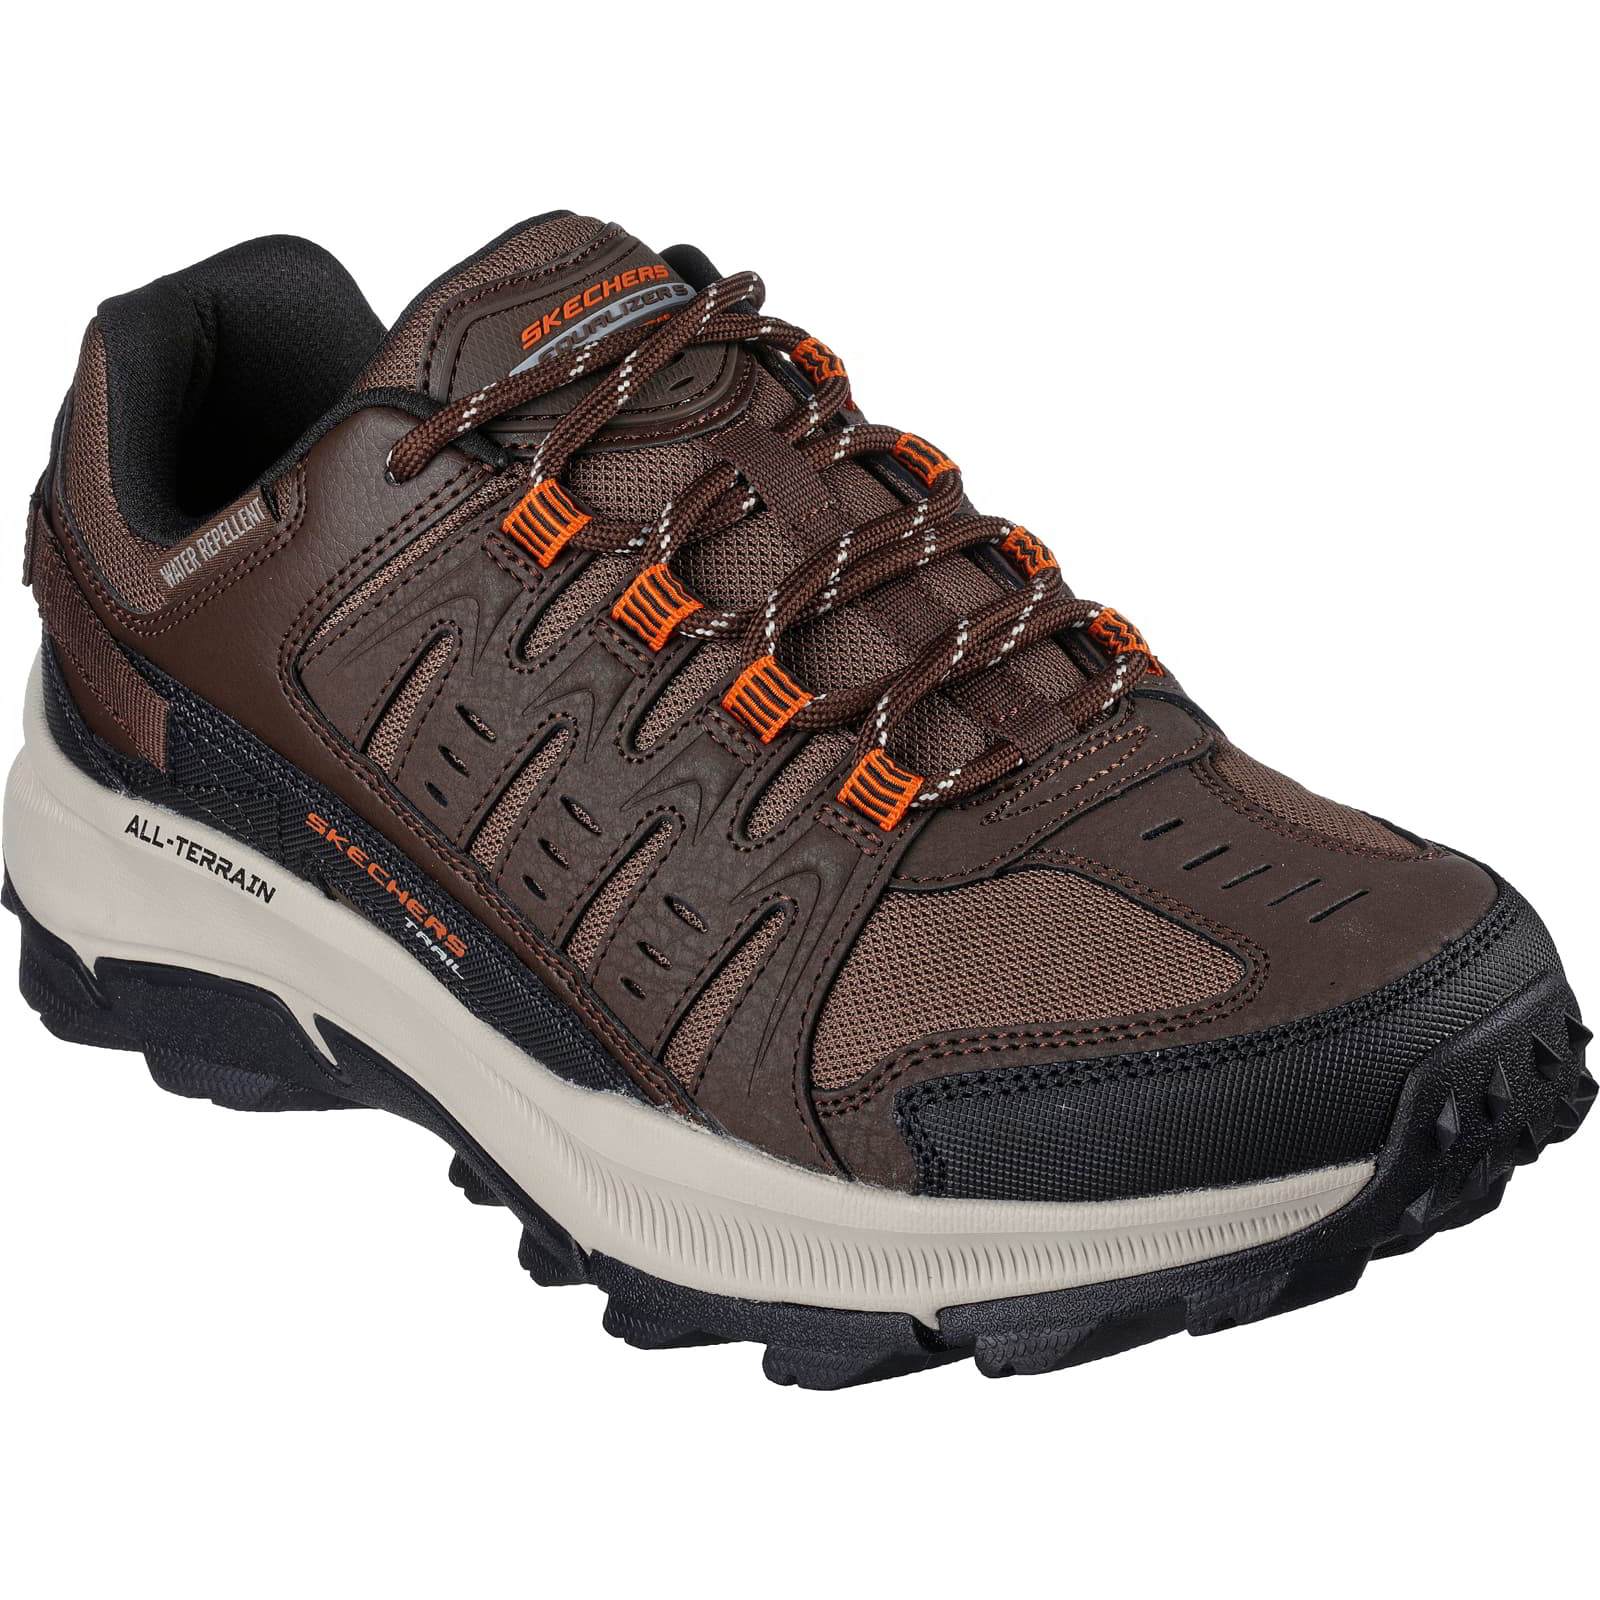 Skechers Men's Equalizer 5.0 Trail Water Repellent Walking Shoes Trainers - UK 10